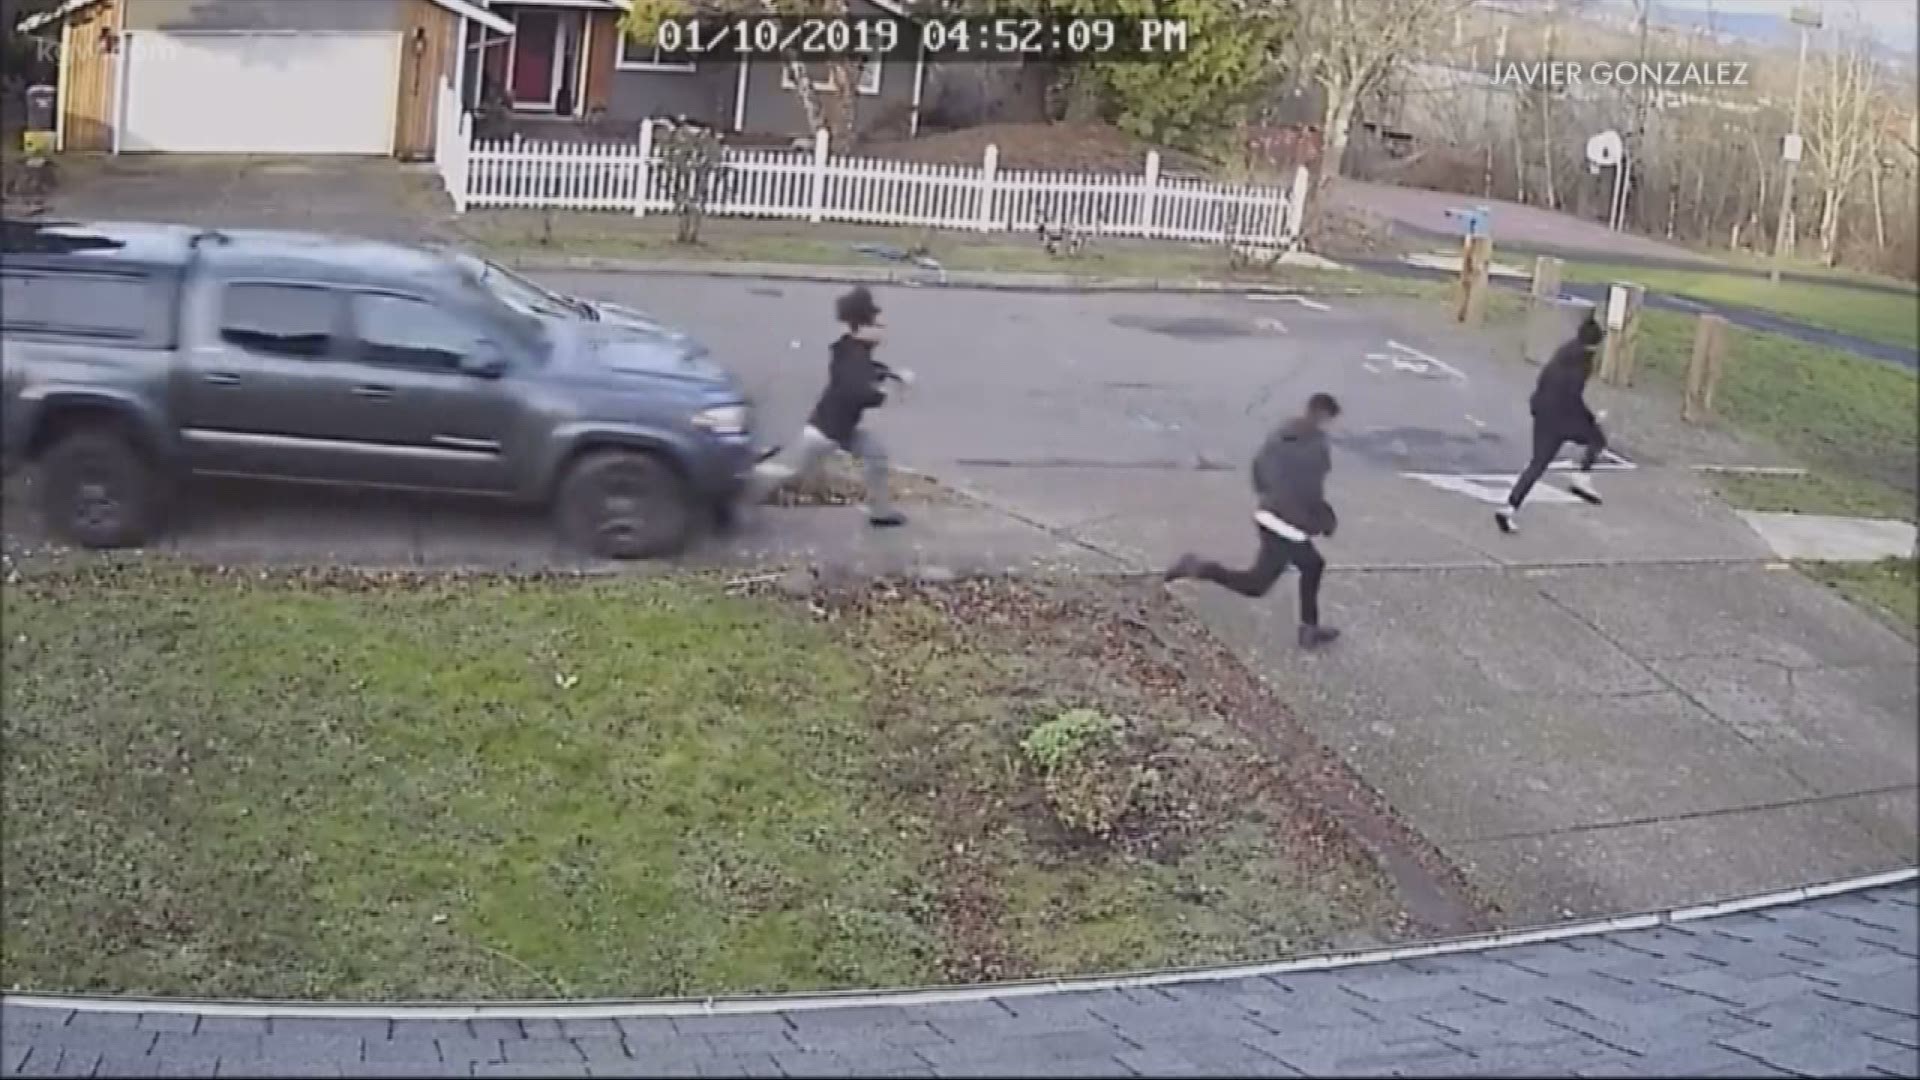 Video shows a pickup truck driver running down three people on a sidewalk in Northeast Portland.